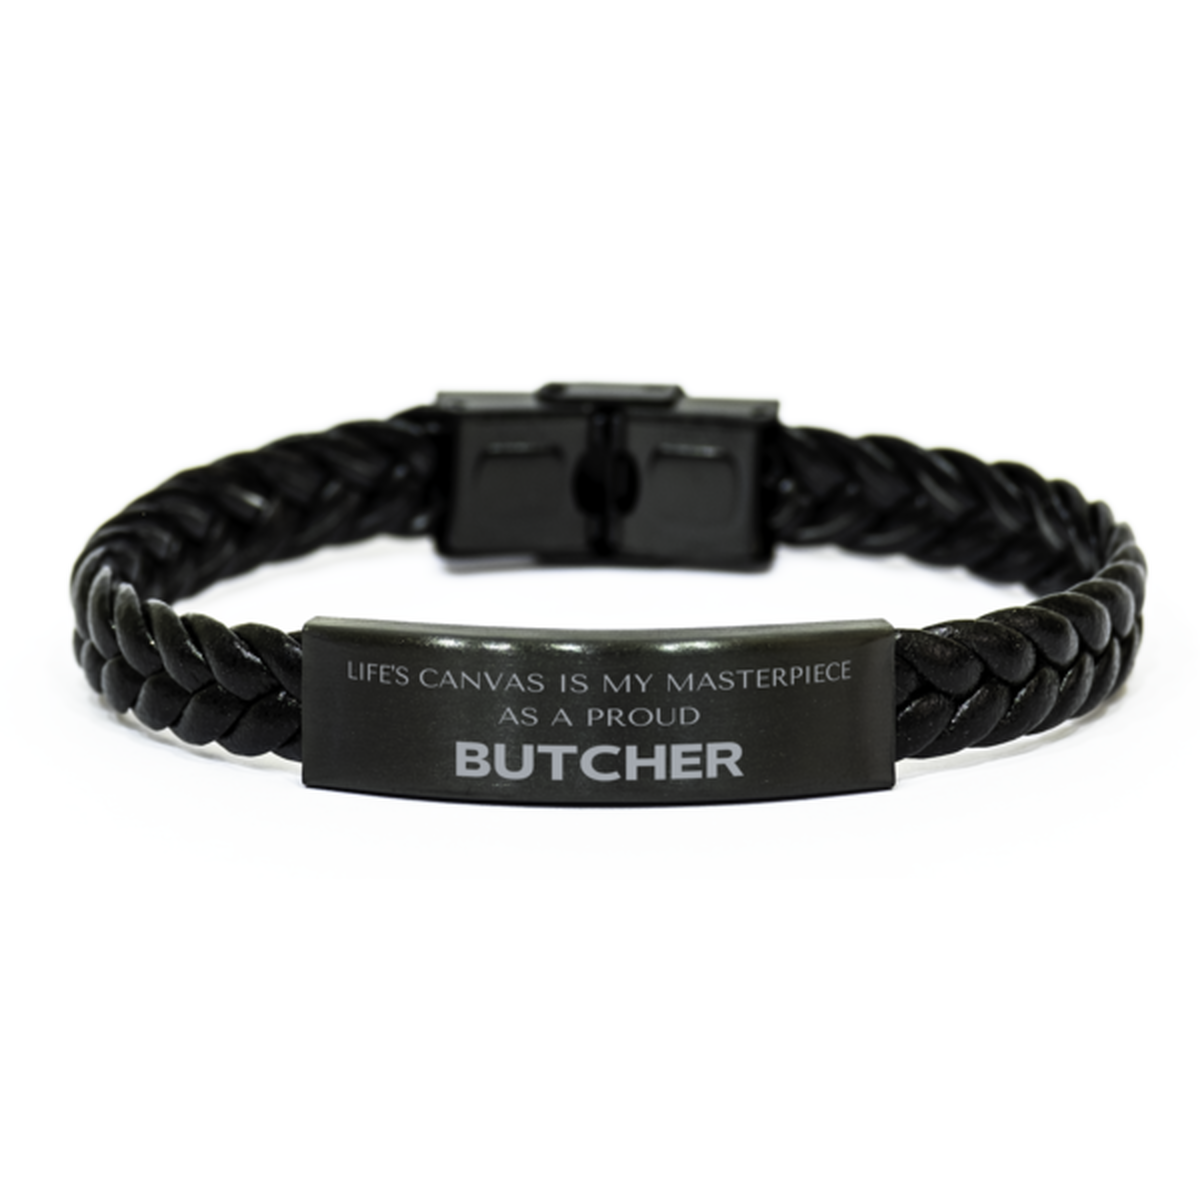 Proud Butcher Gifts, Life's canvas is my masterpiece, Epic Birthday Christmas Unique Braided Leather Bracelet For Butcher, Coworkers, Men, Women, Friends